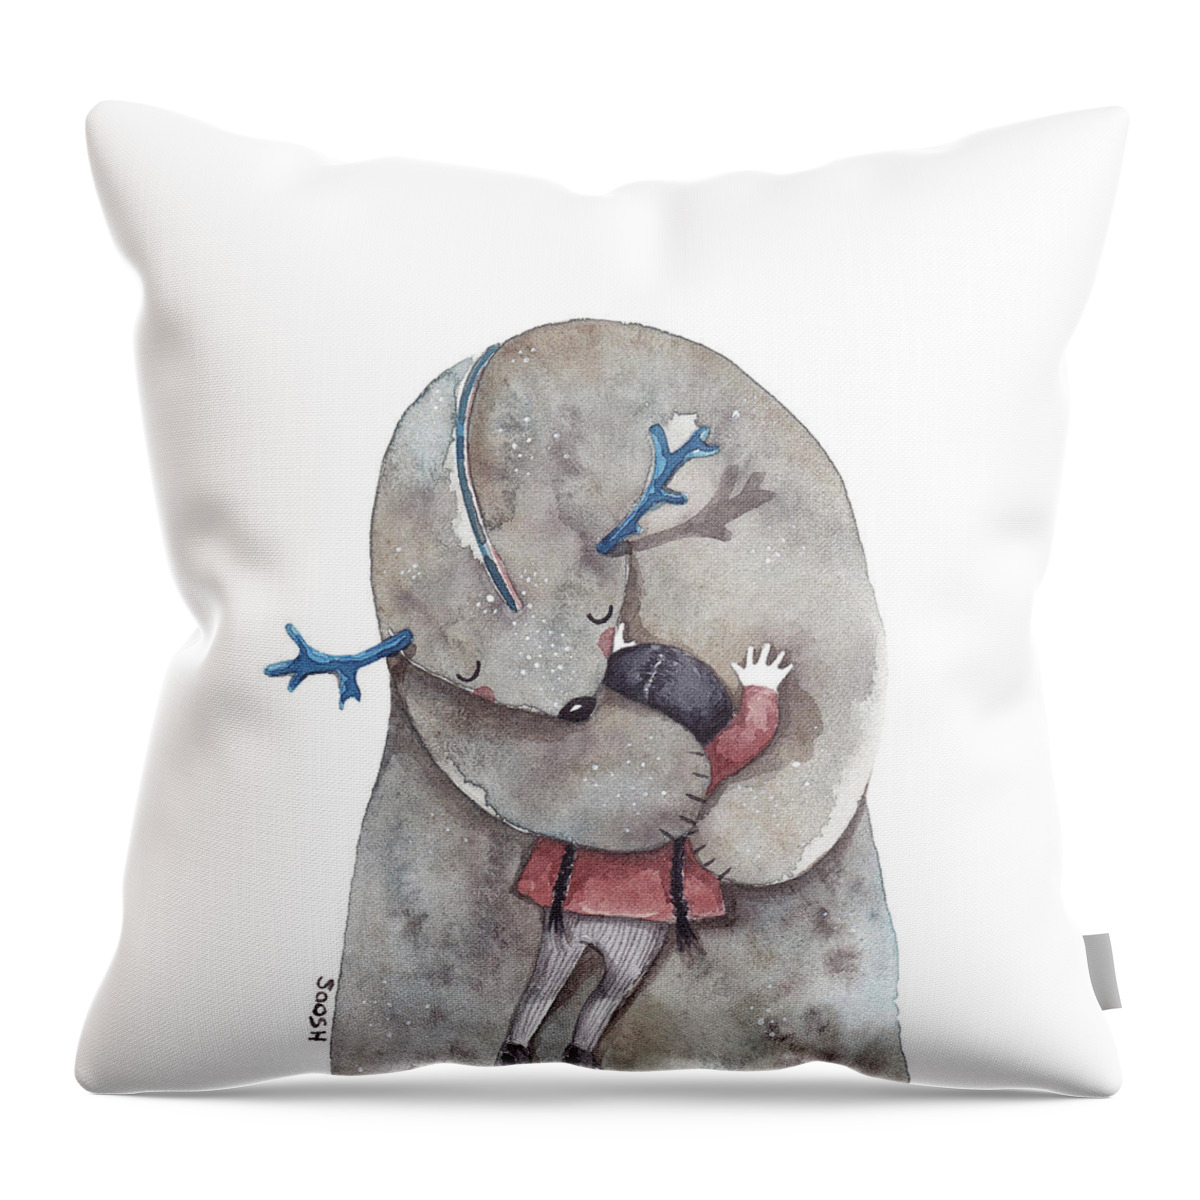 Art Throw Pillow featuring the painting Hug me by Soosh 